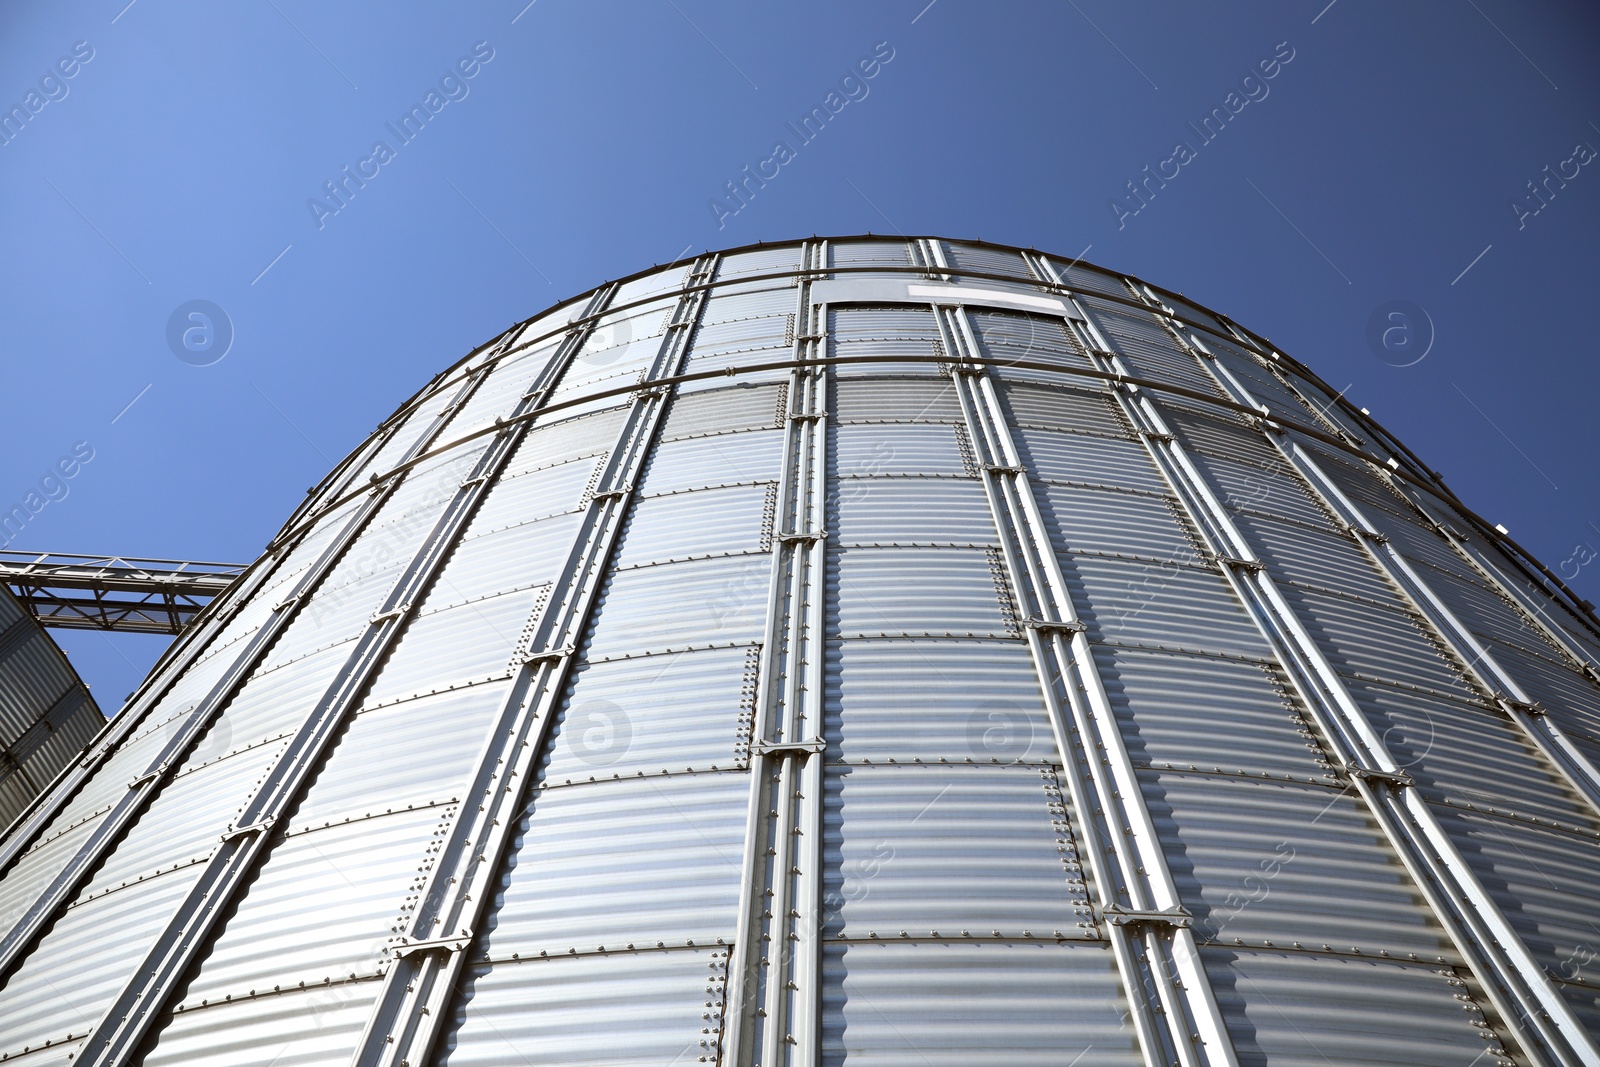 Photo of Modern granary for storing cereal grains against blue sky, low angle view